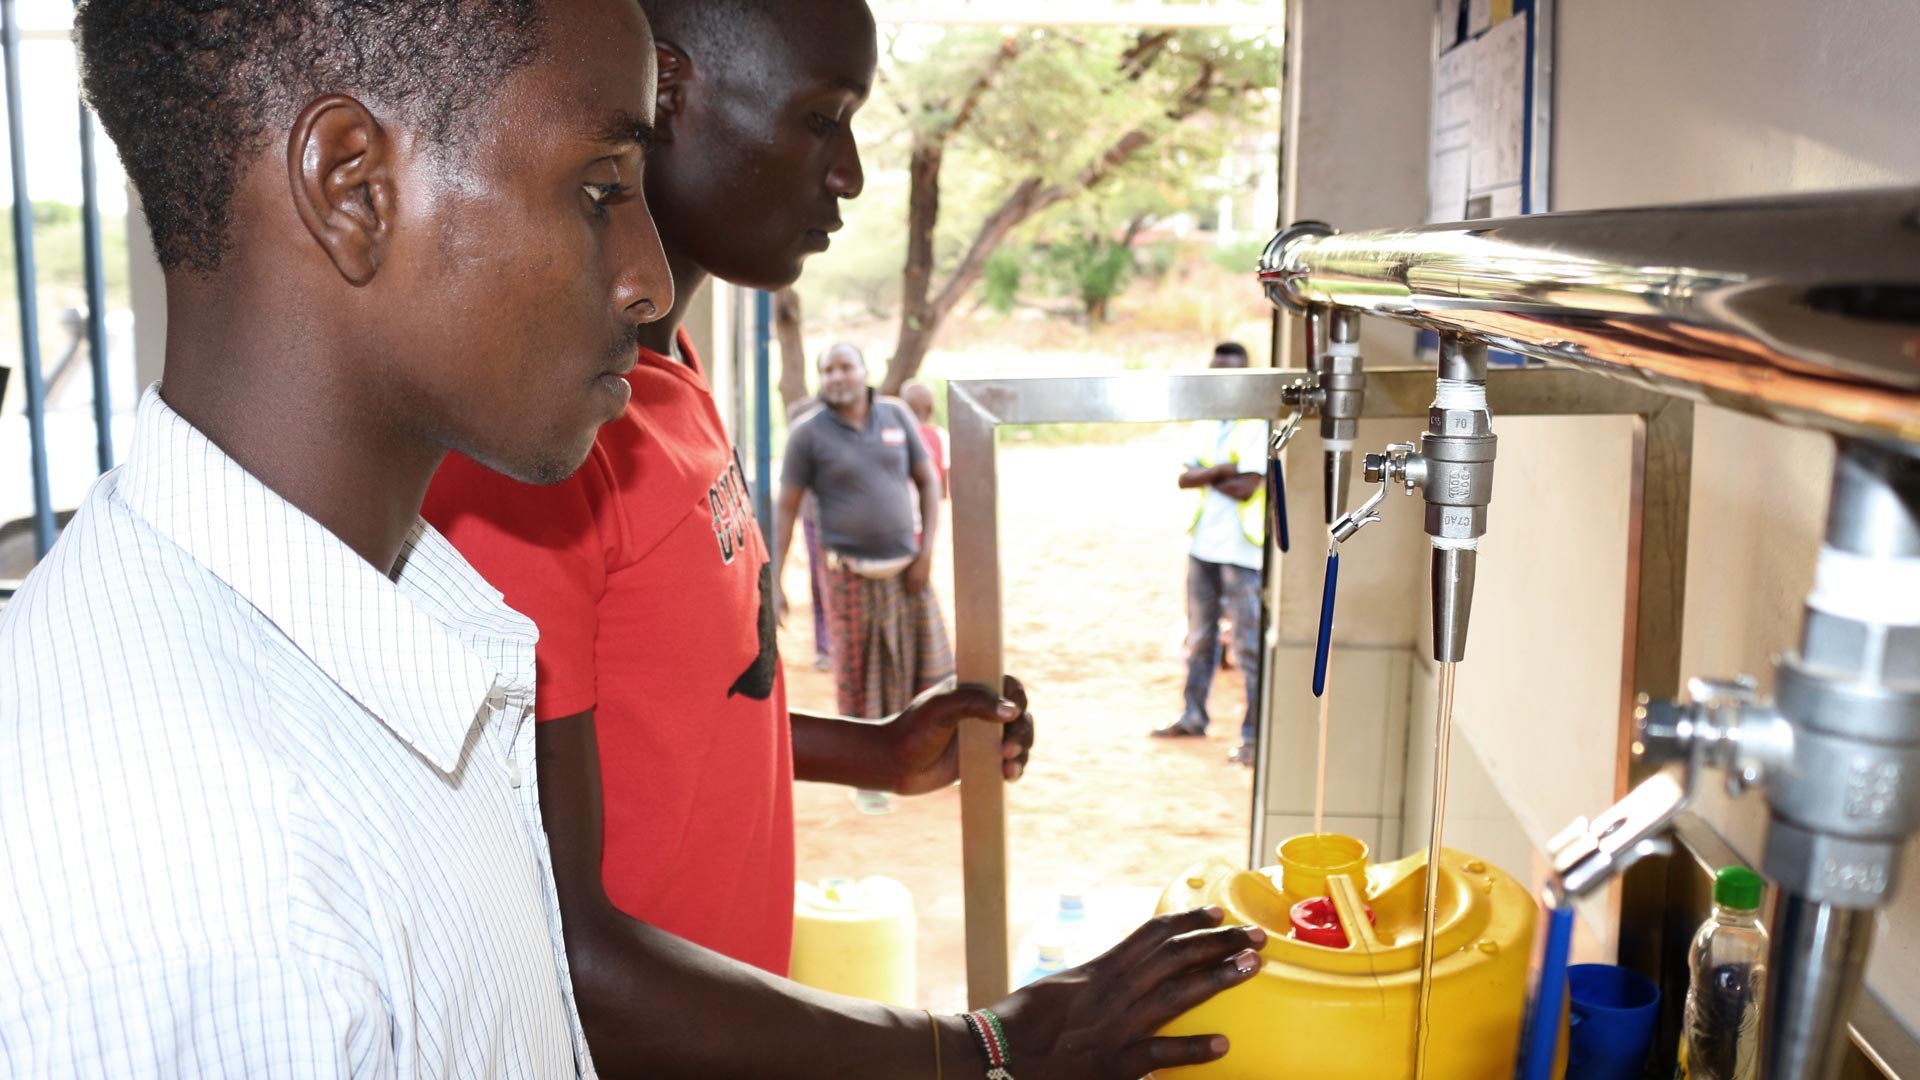 Two young Kenyan men fill up drinking water at a WaterKiosk